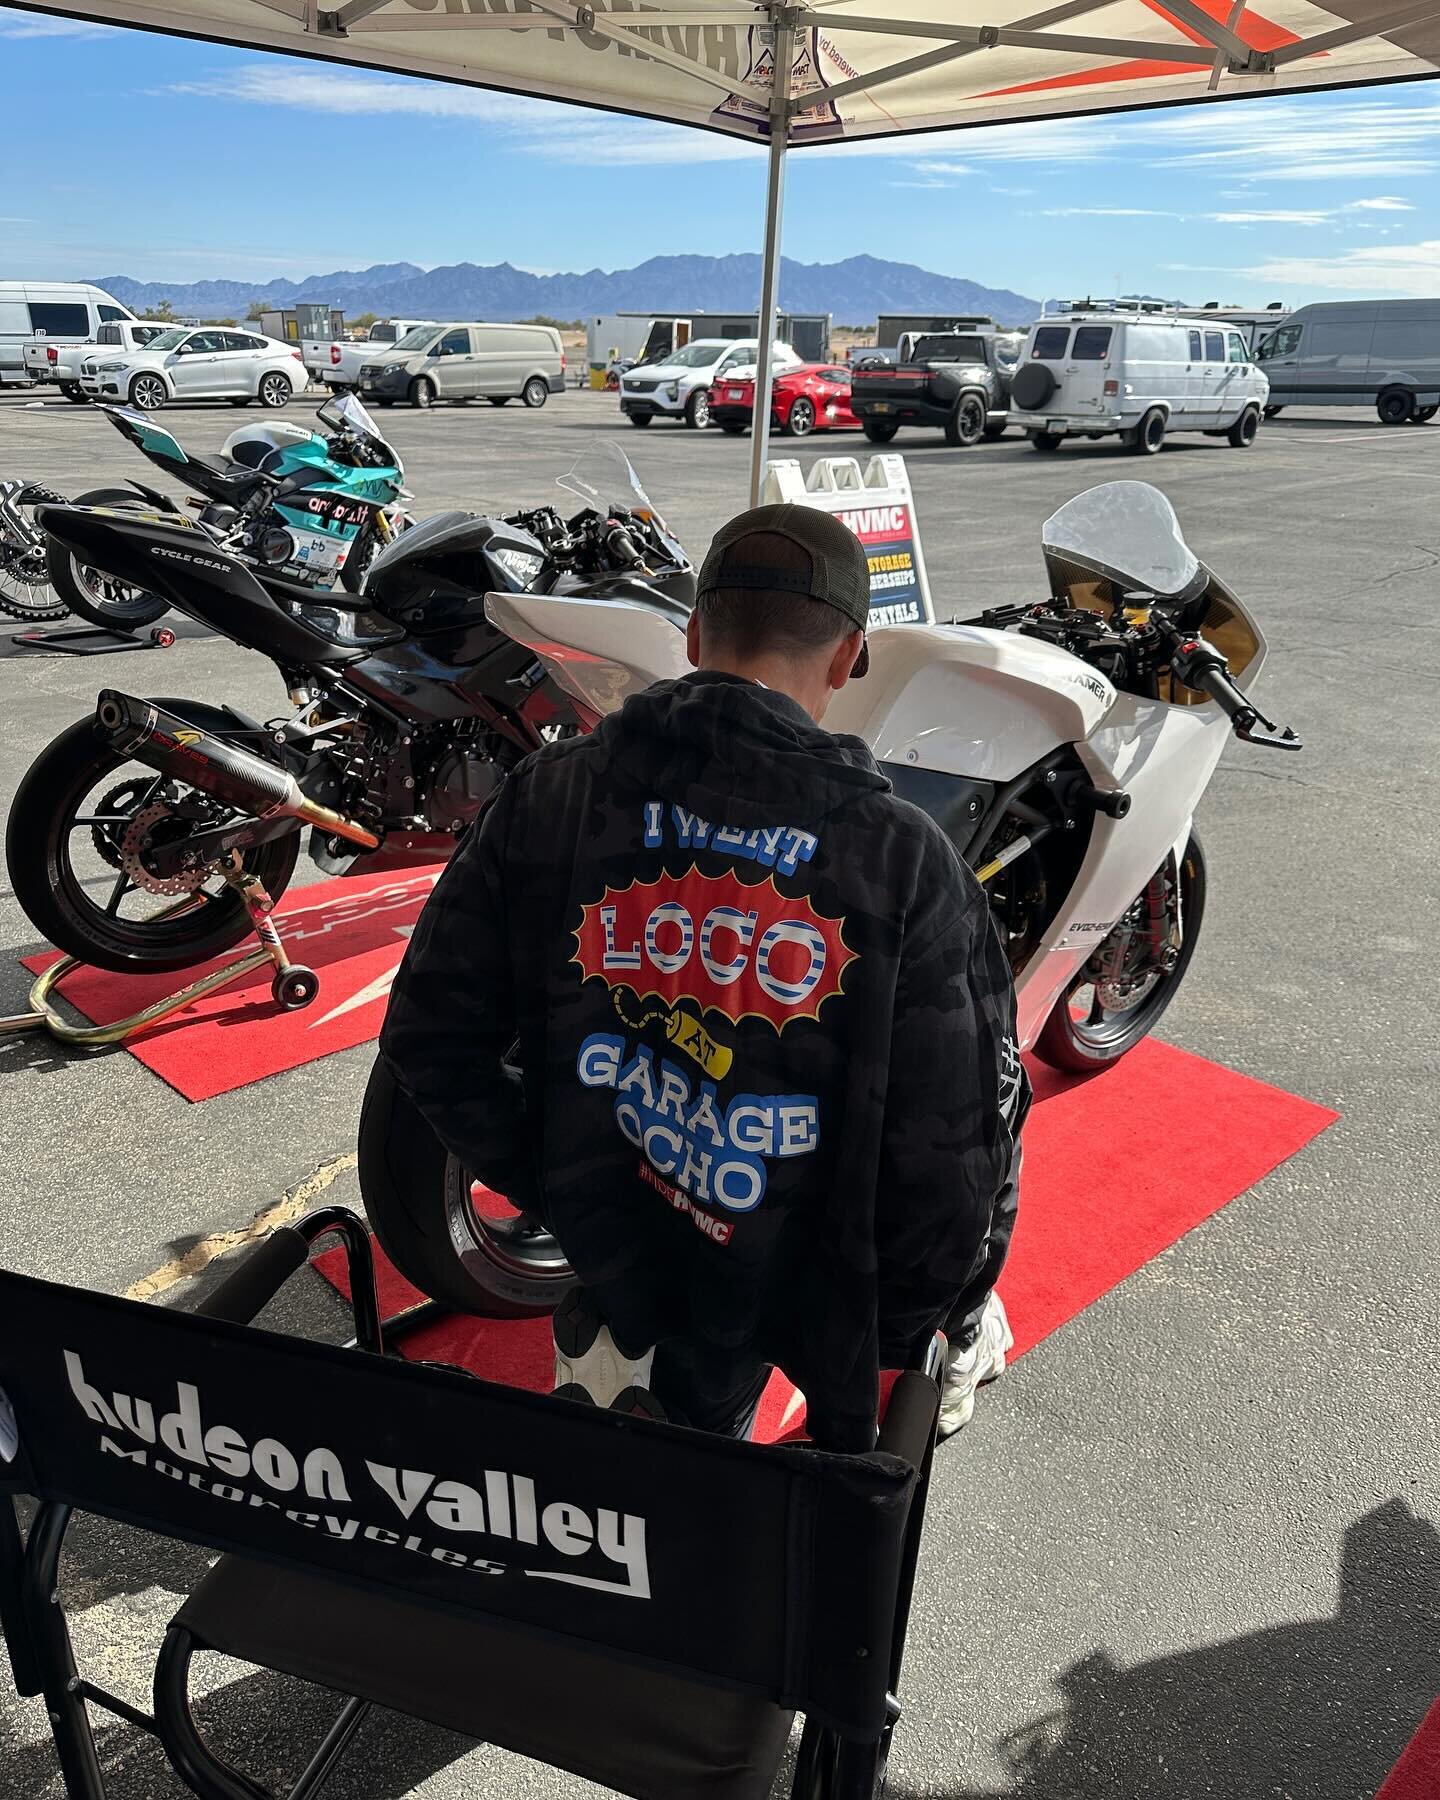 The @chuckwallavalleyraceway winter season is winding down! We&rsquo;ve got dates available for bike rentals in March and April. Get out of the cold and come get loco with us so you&rsquo;re fresh in time for the 2024 season. 🌵 🏁 

#RideHVMC #Winte